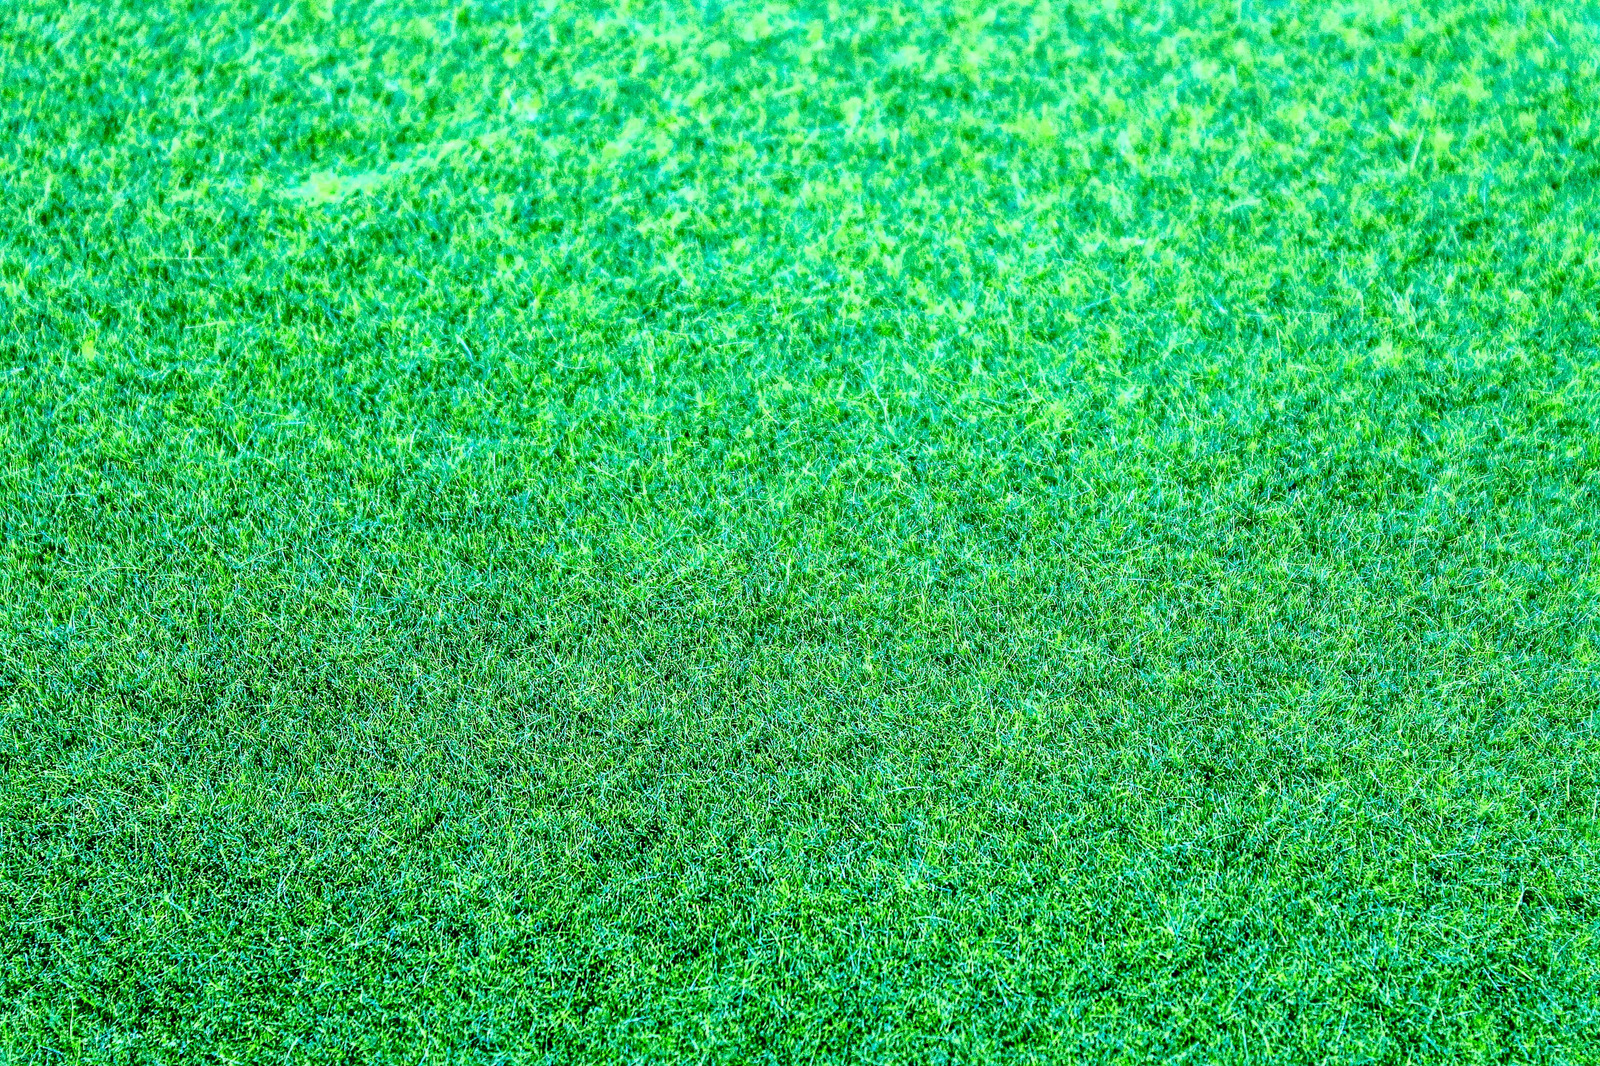 this image shows turf colors offered by proturf artificial grass solutions in california